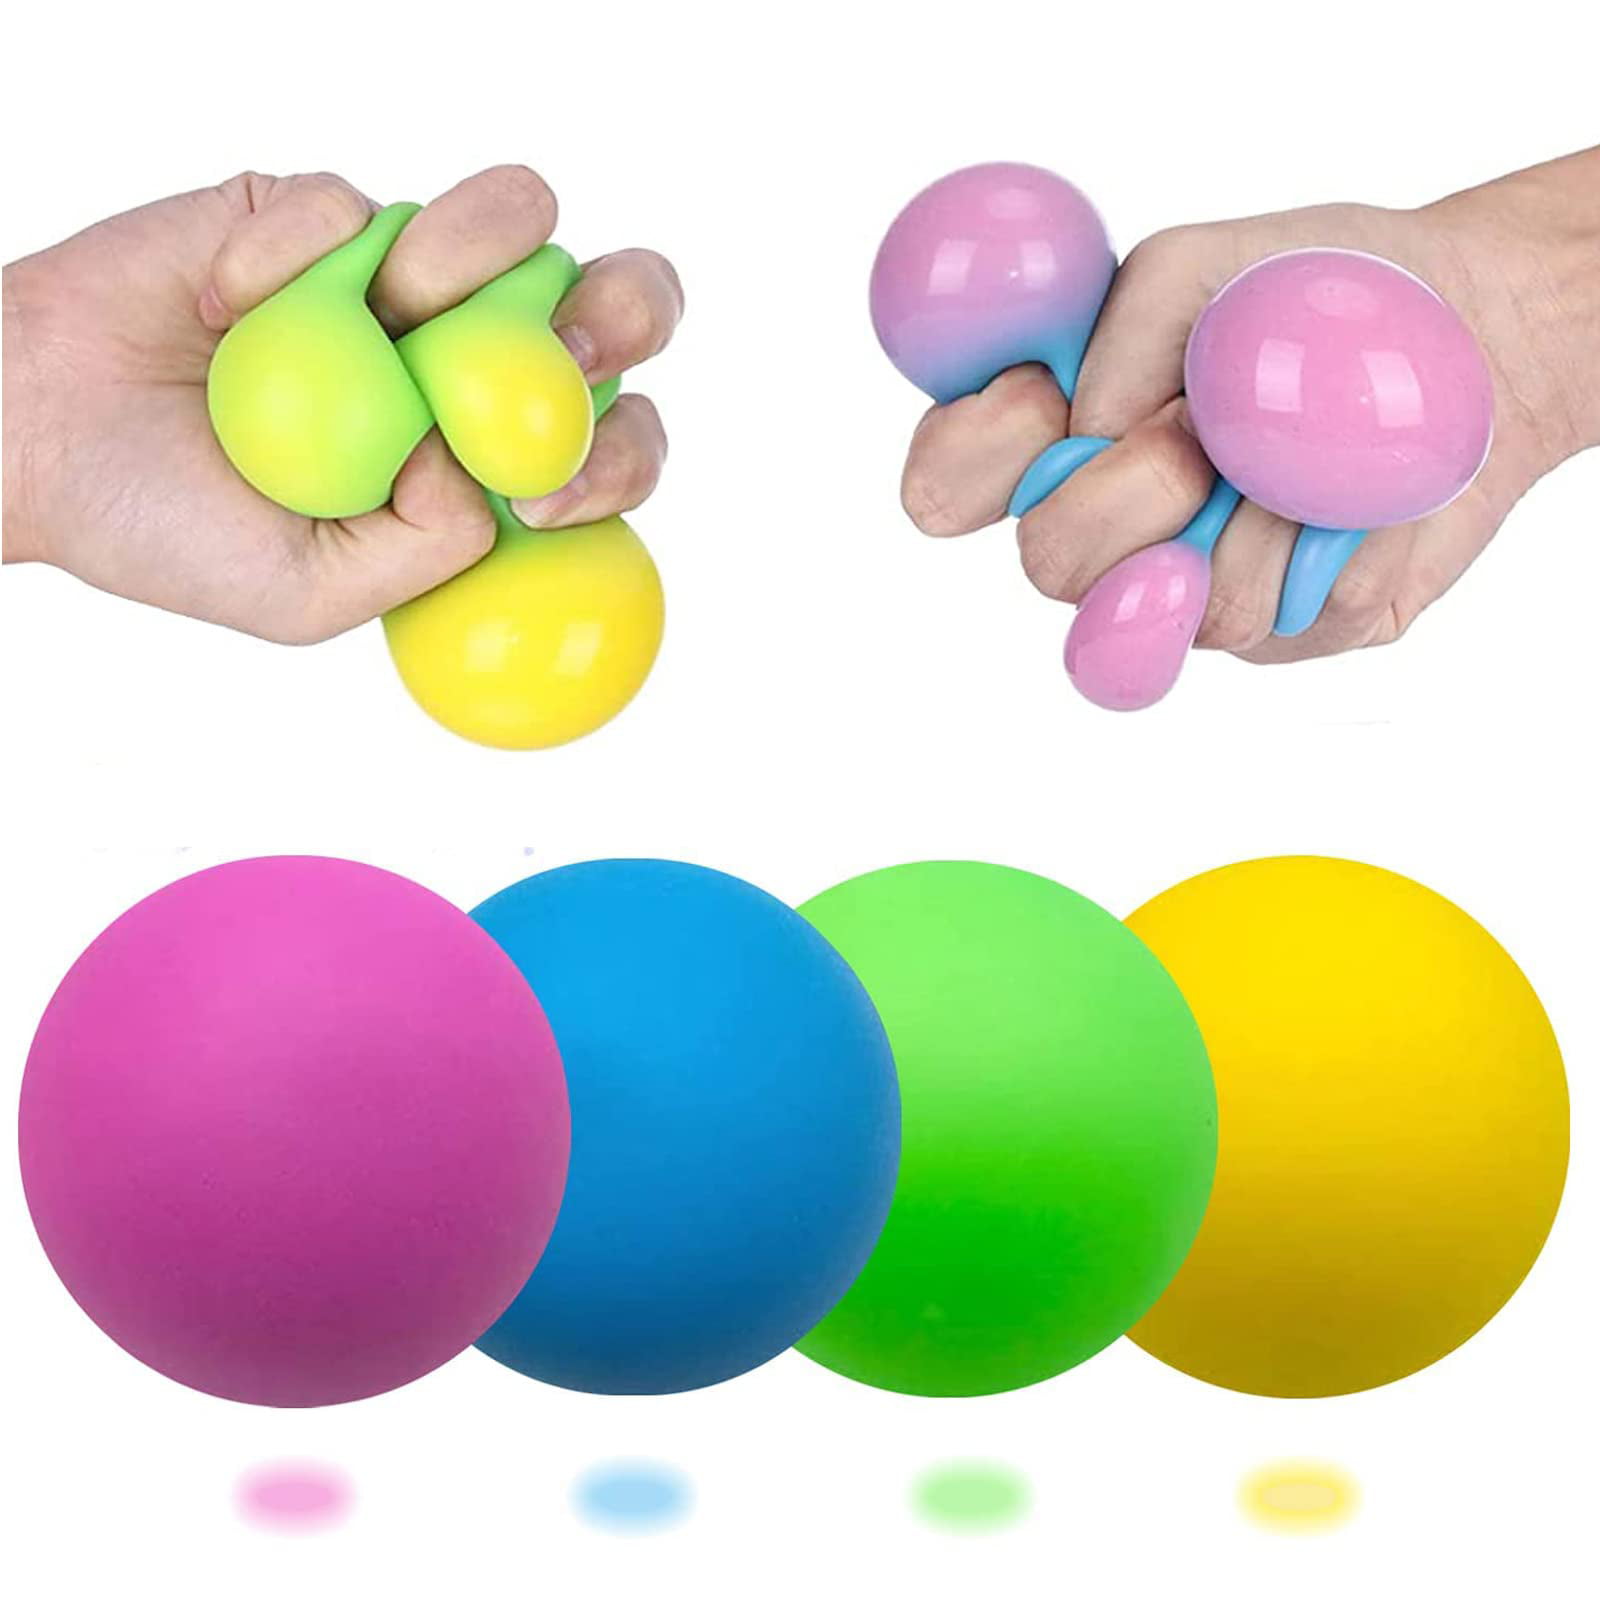 1 Slo-rise squishy squeeze stress ball anxiety stress autism fidget for kids 